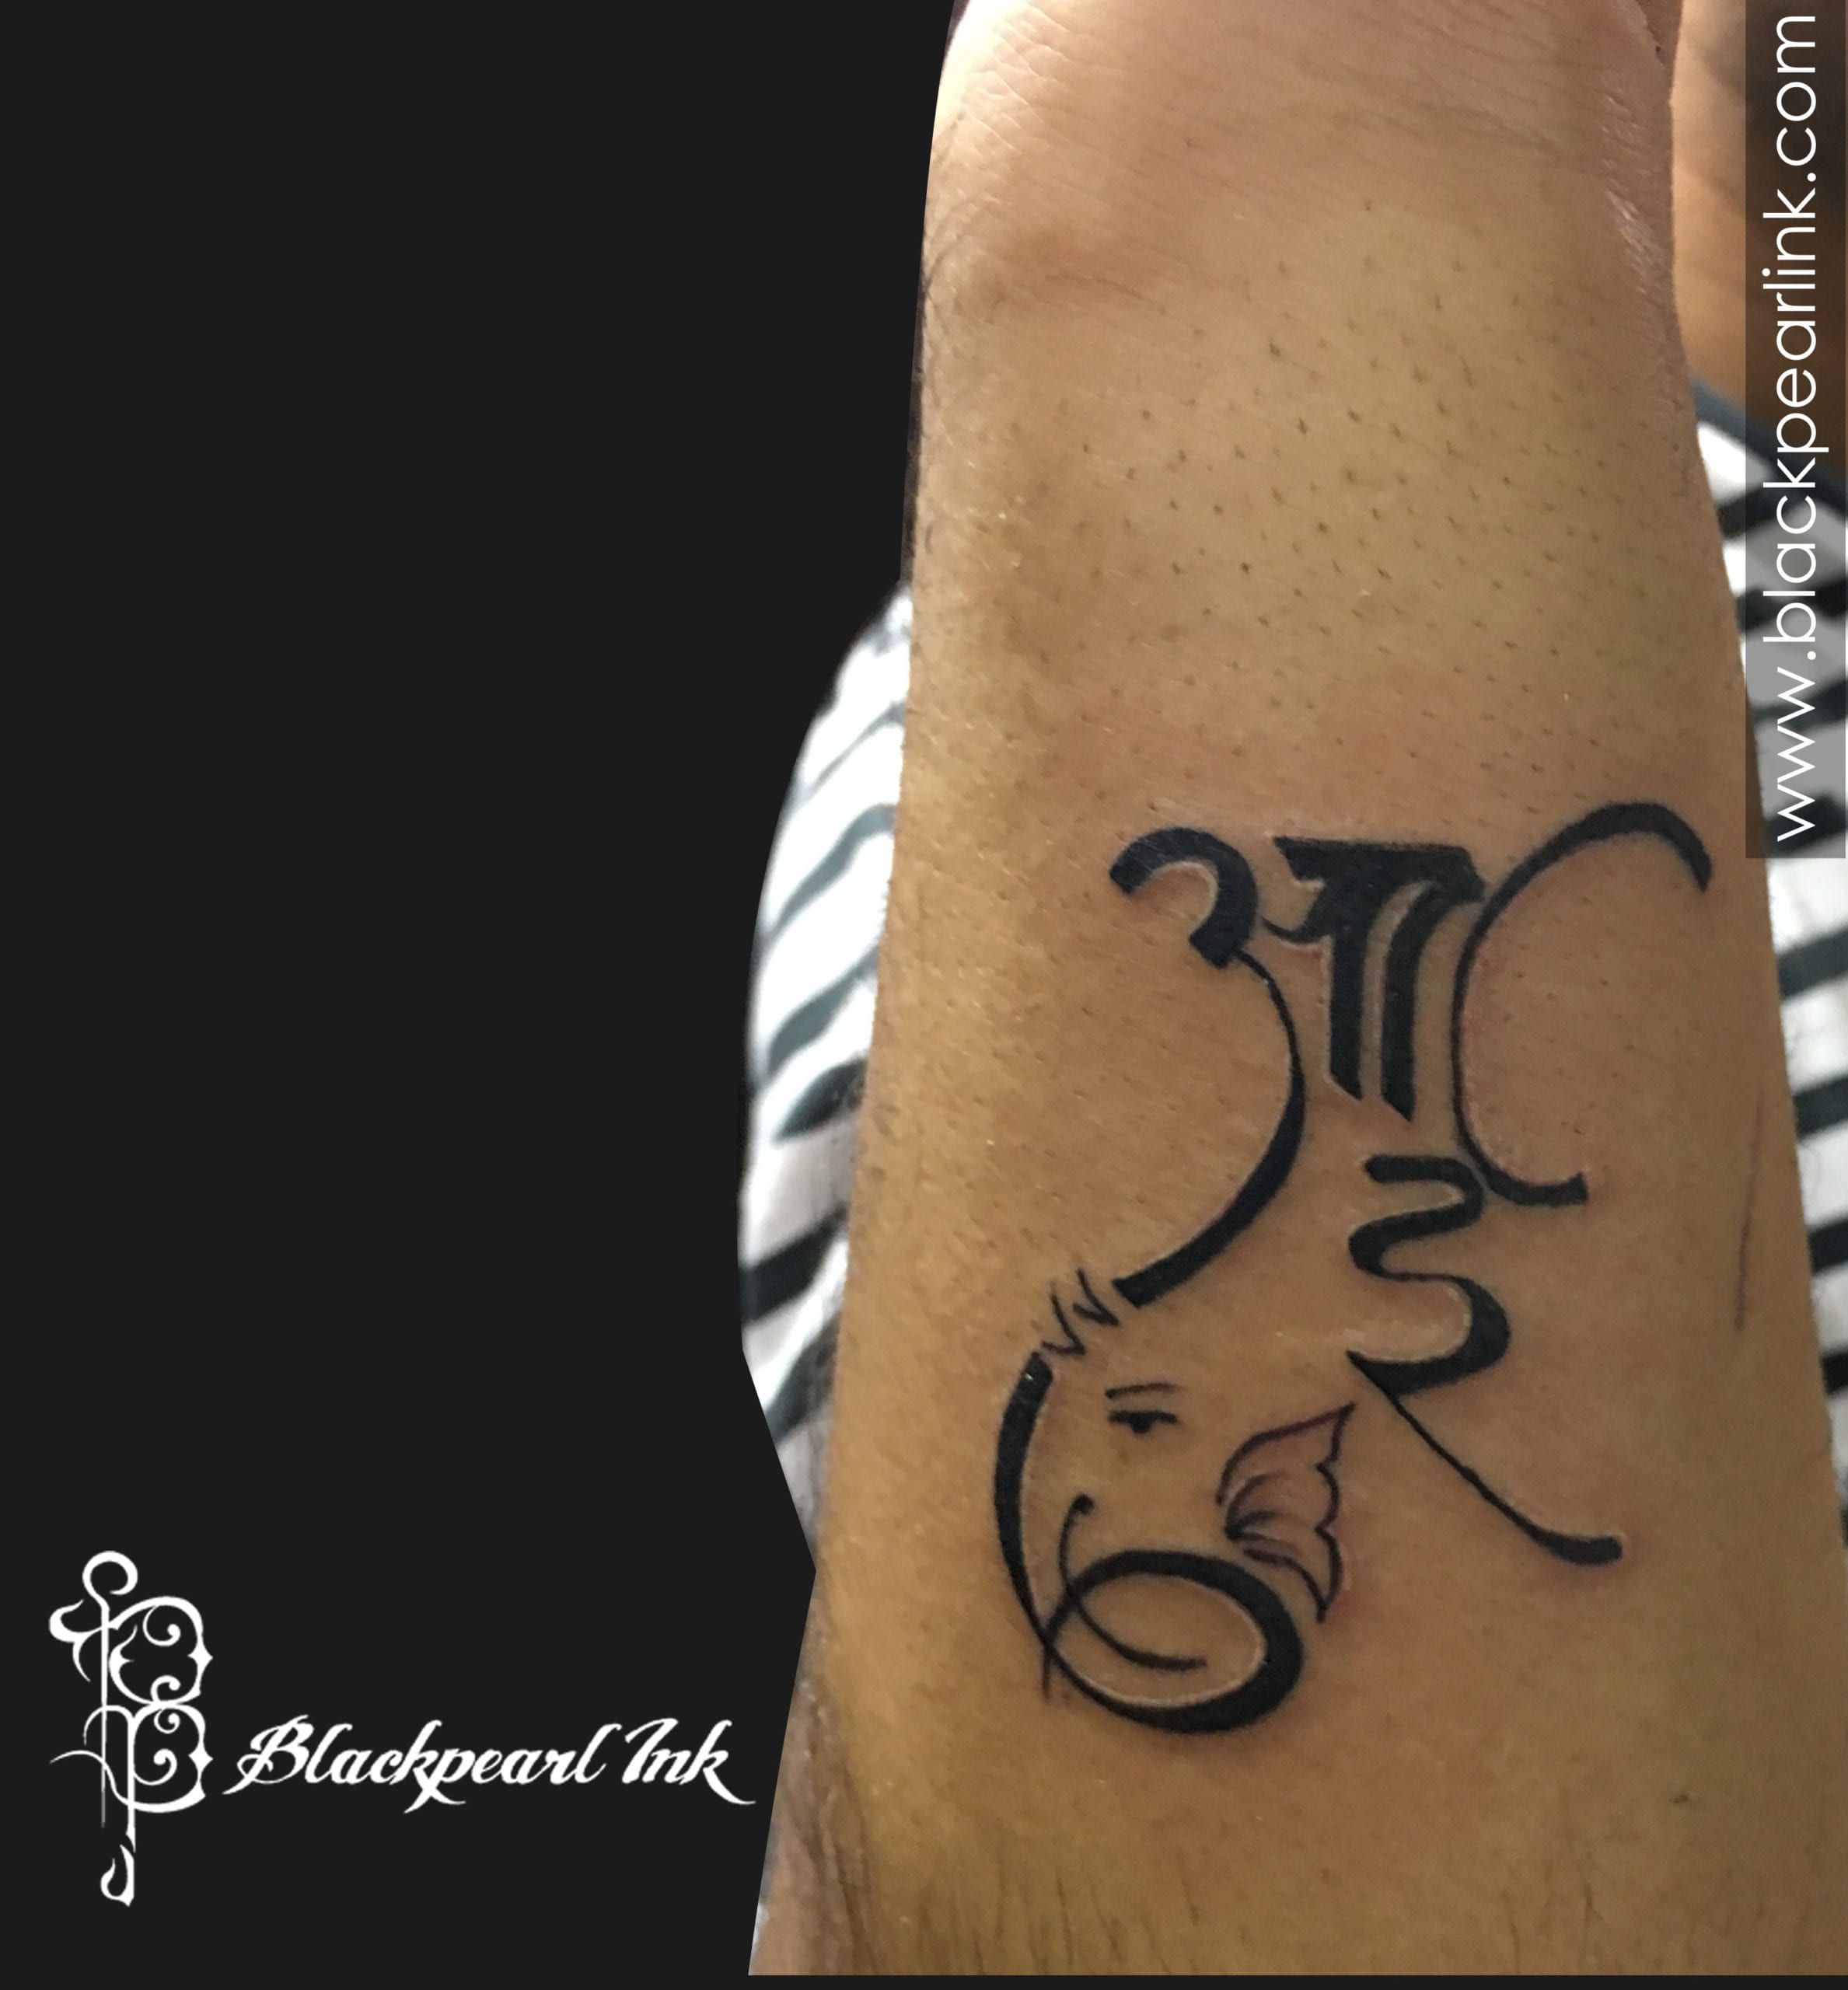 The Pulse Tattoo  Pallavi Kumawat  Aai Baba name of his brave mom dad   Custom calligraphy tattoo by Pallavi kumawat Hope u guys like this too  Your ViewsComments and Shares